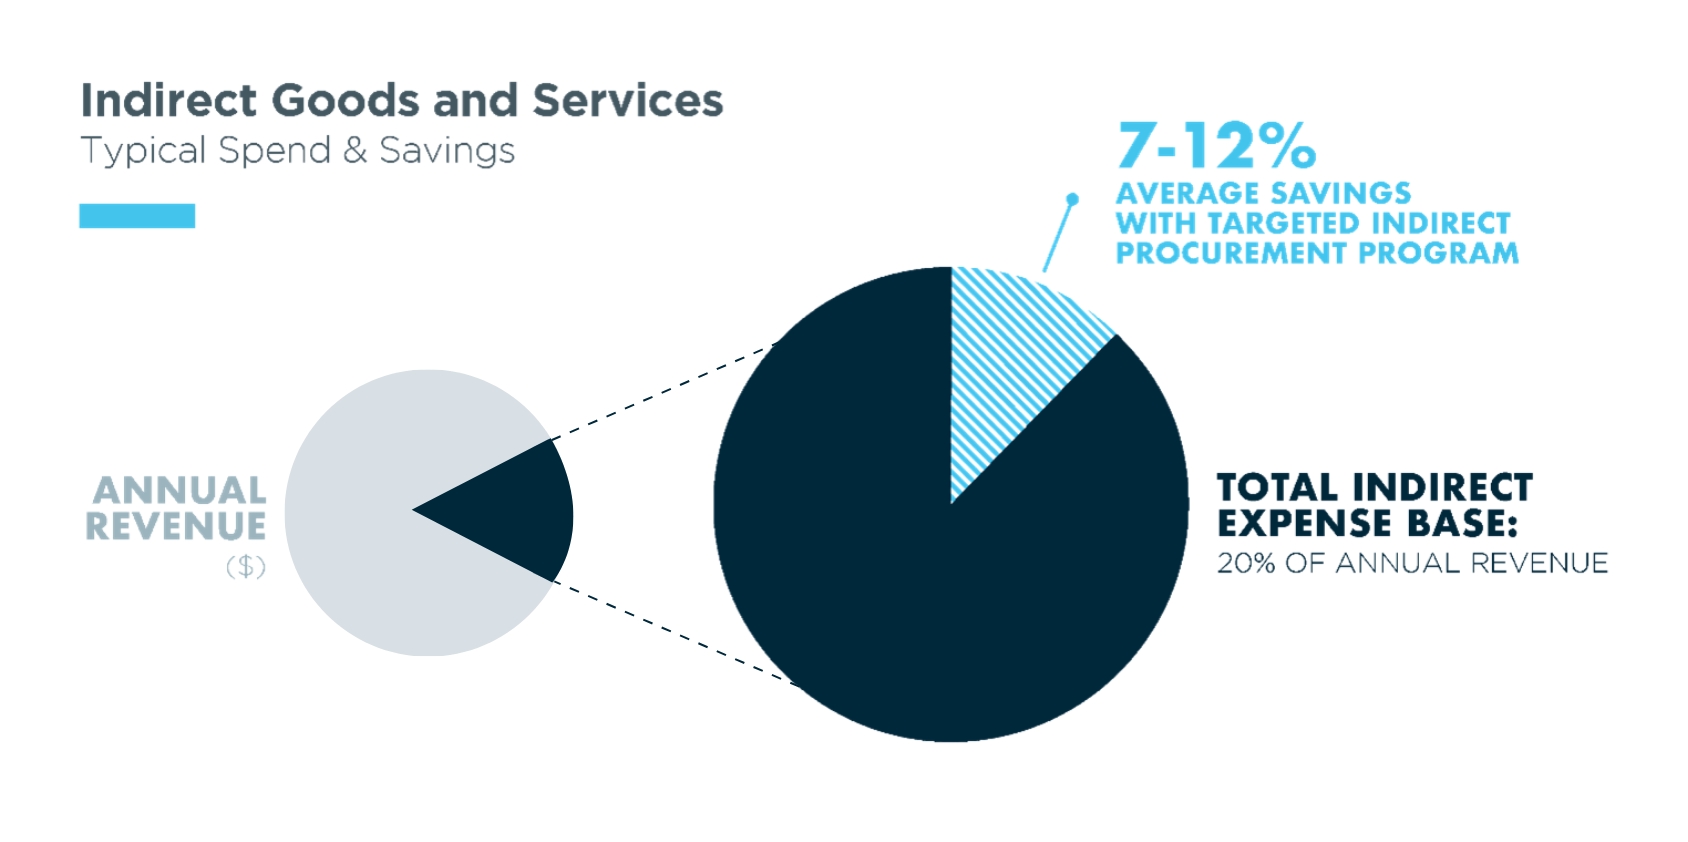 Indirect goods and services pie chart